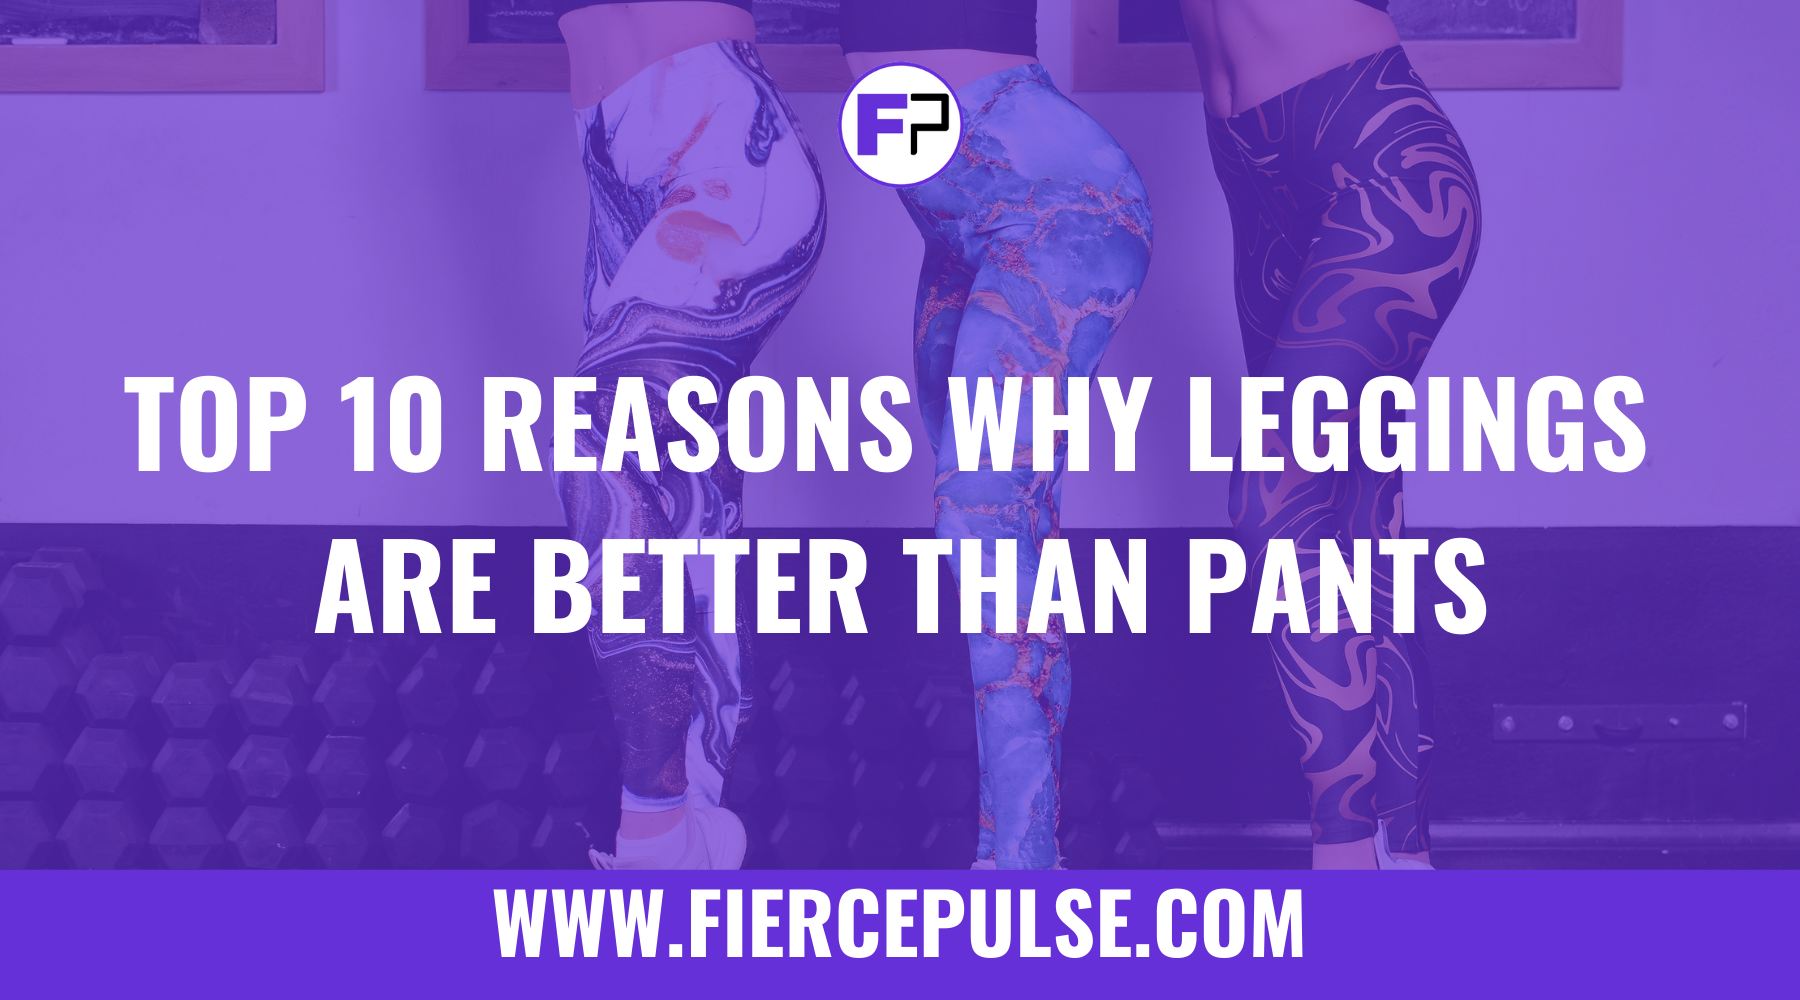 Top 10 Reasons Why Leggings are Better Than Pants